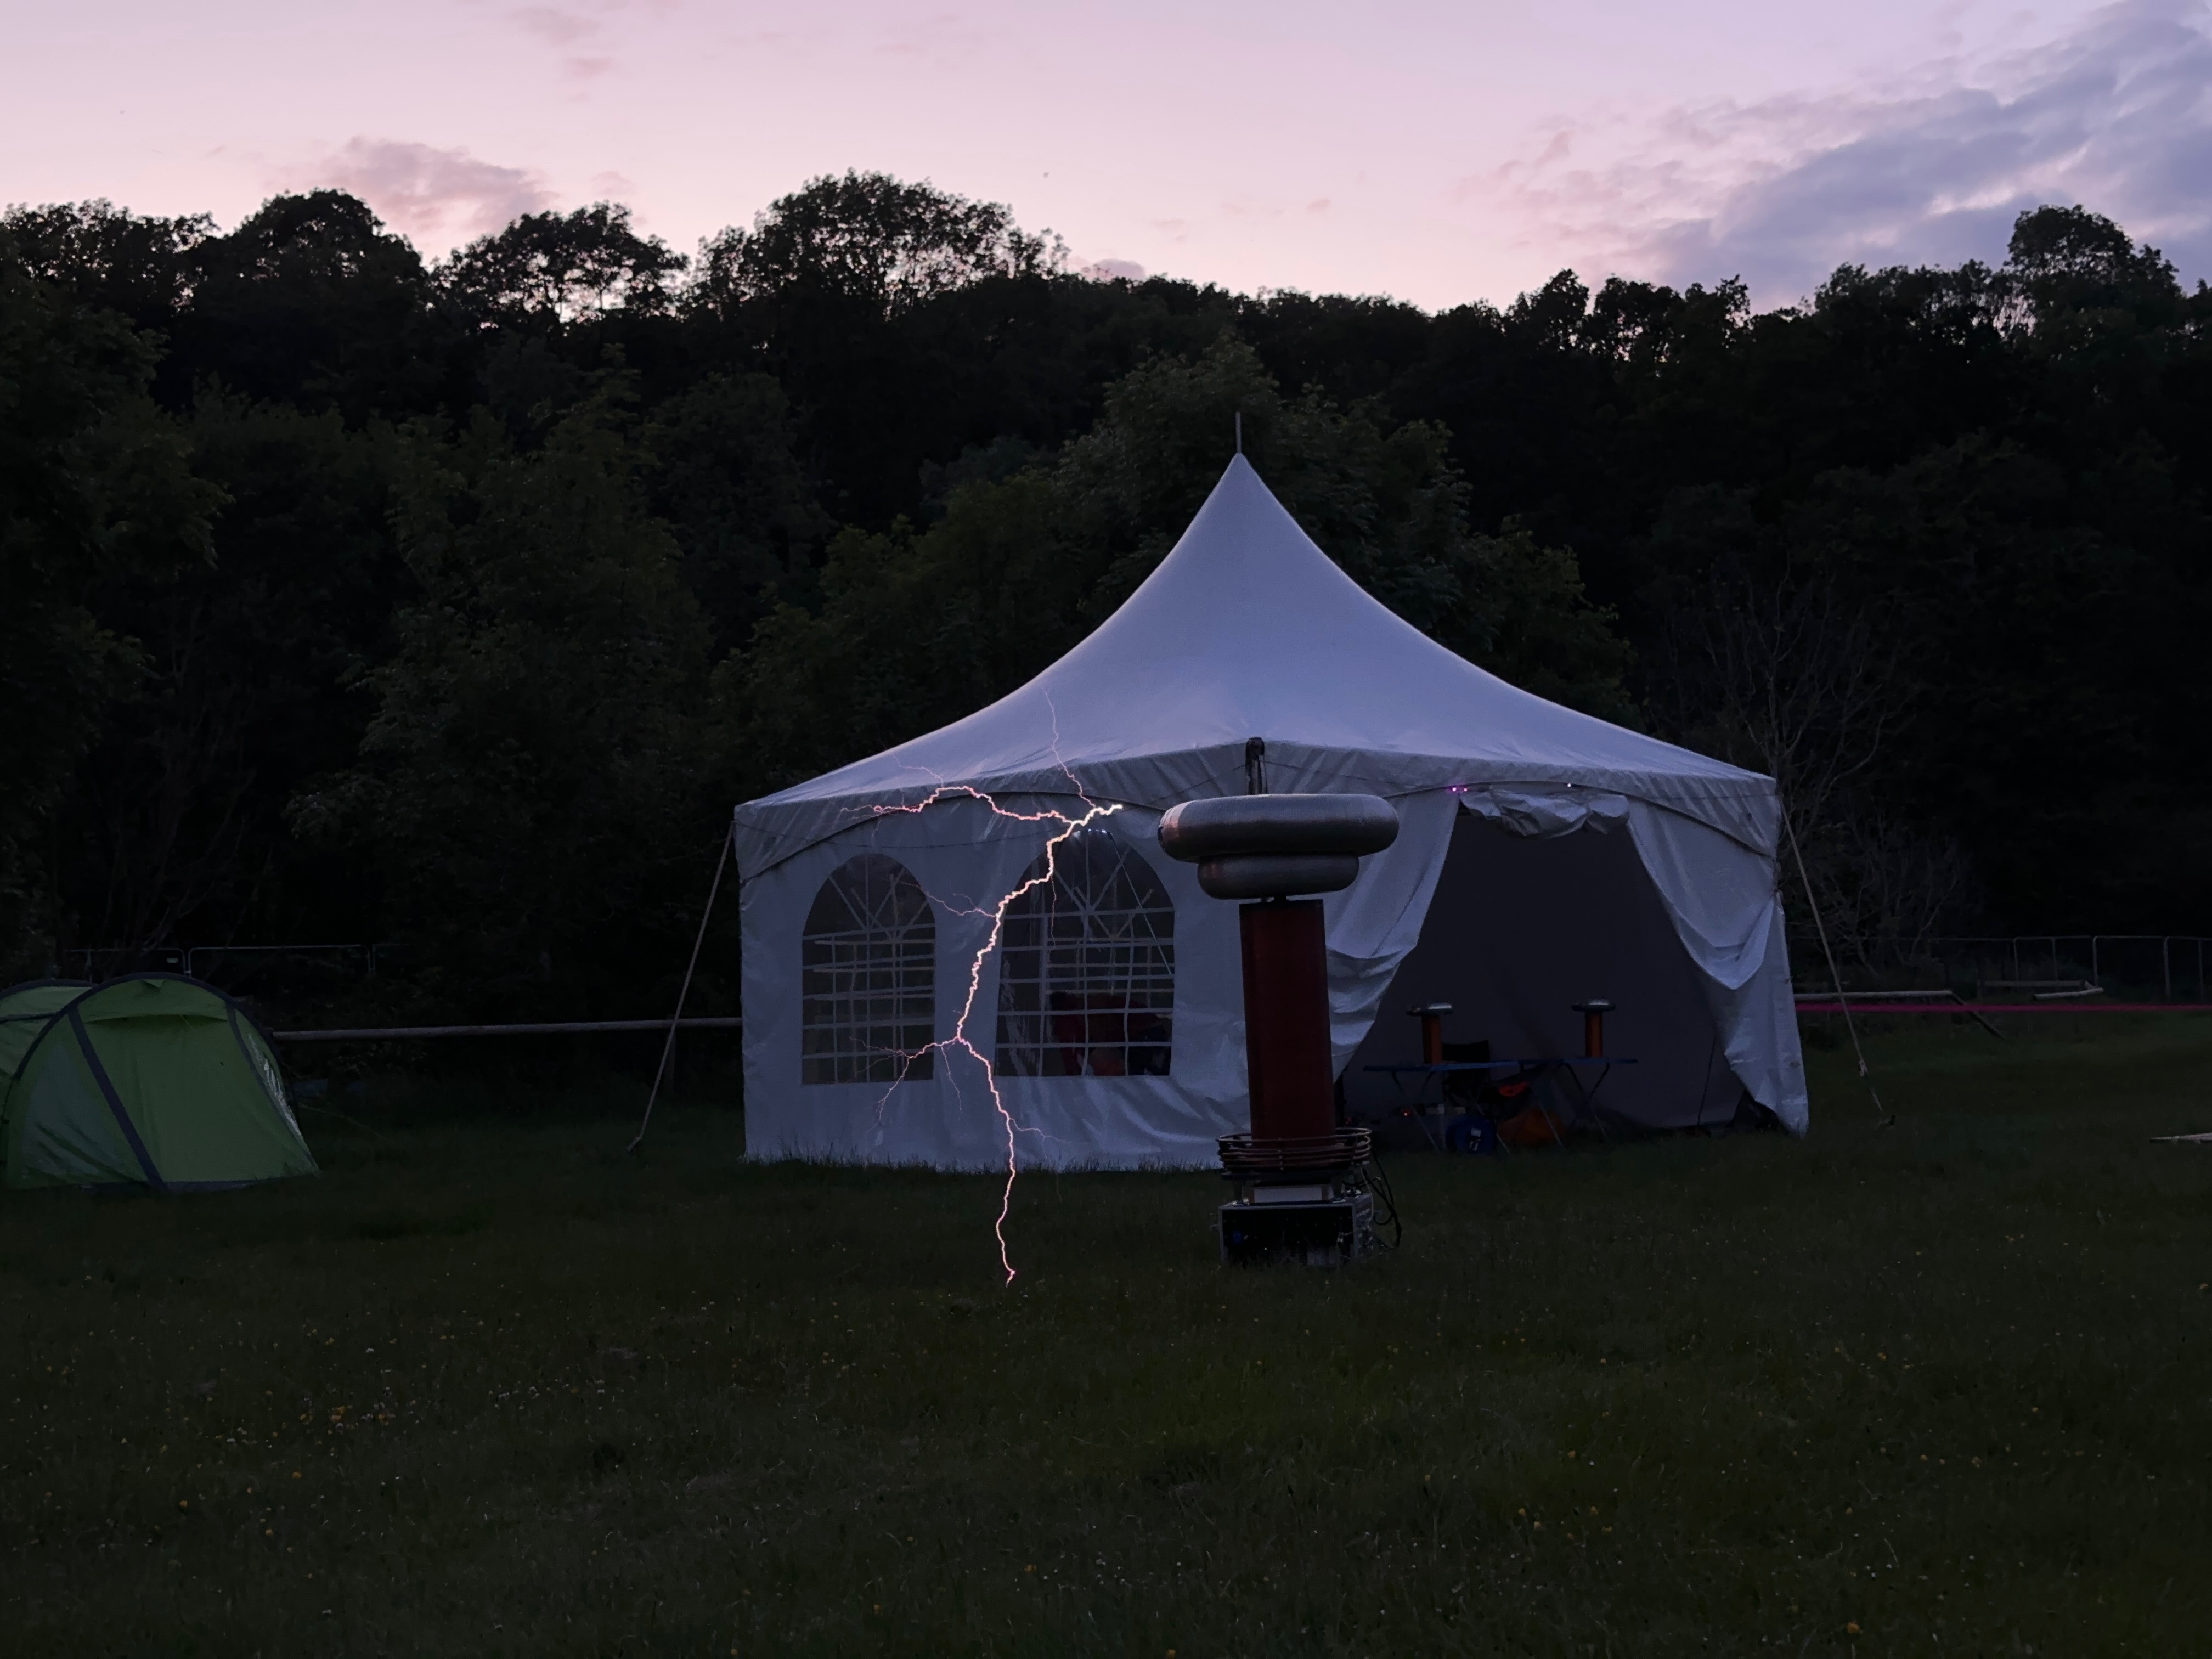 A Tesla coil stands in a field in front of a small marquee tent. A spark leaps from the coil down to the ground.